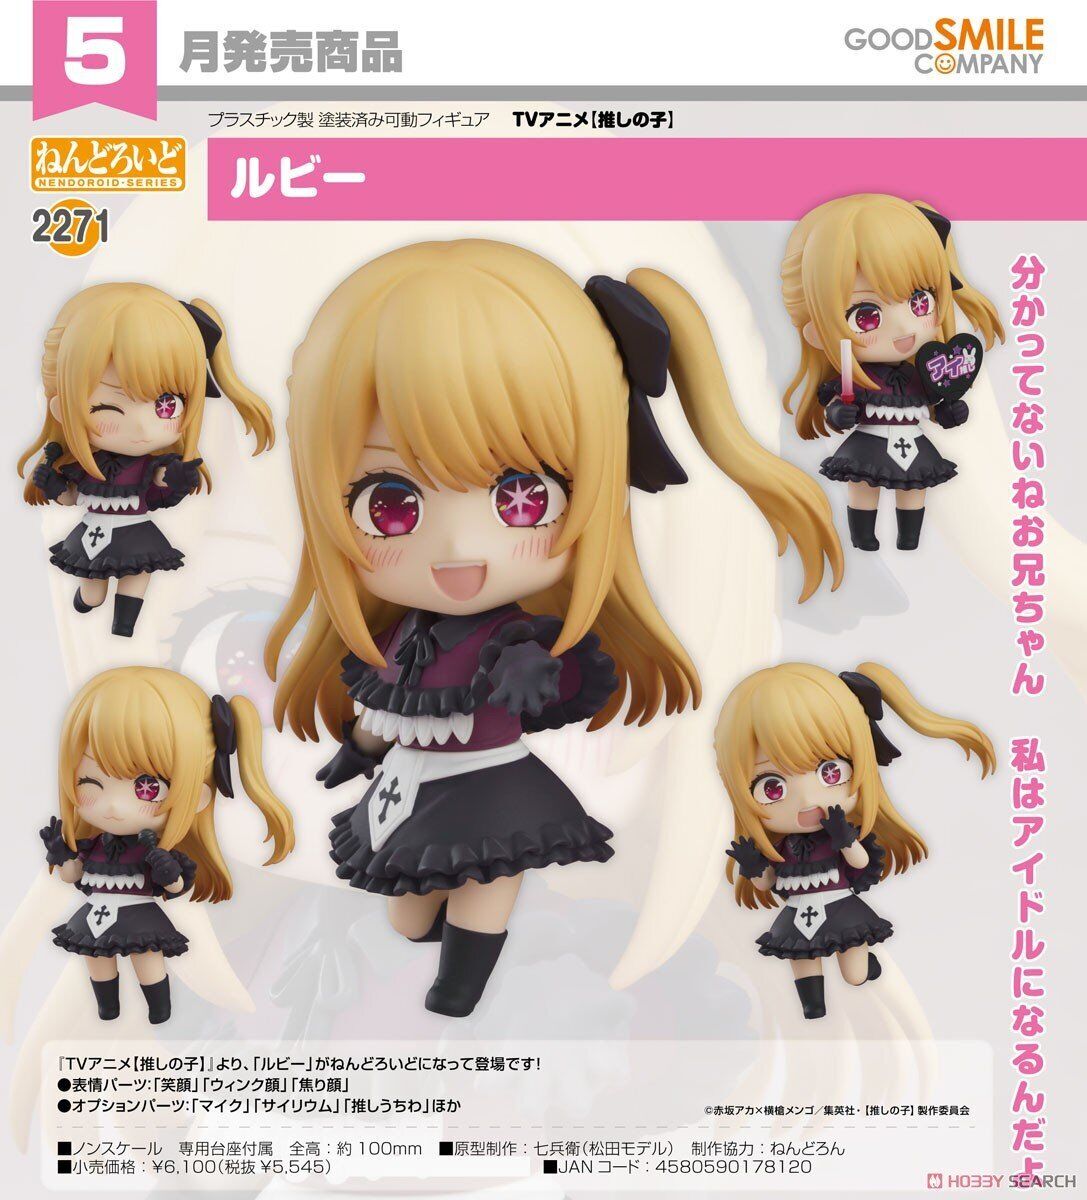 GSC NENDOROID Oshi no Ko 2271 Ruby Action Figure in stock